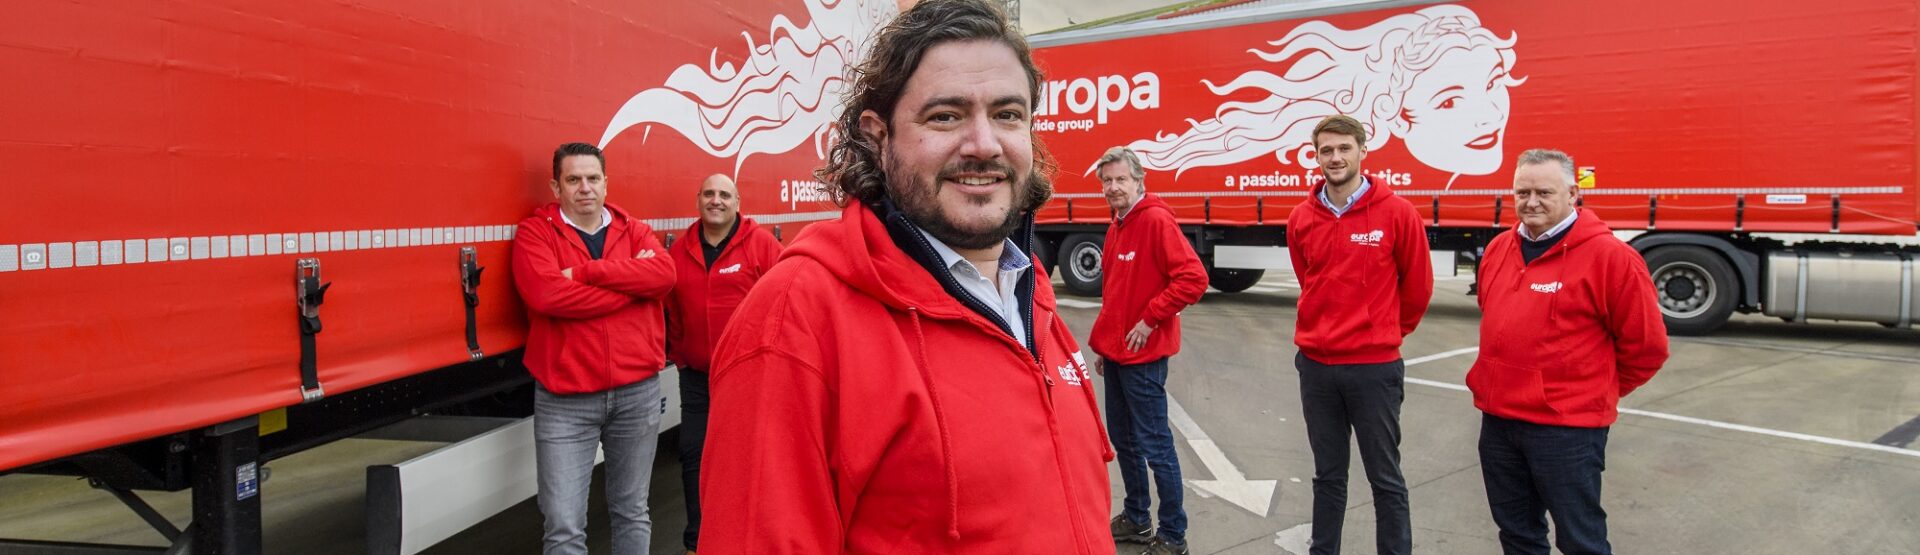 Carlo Turner and team stand in red, branded Europa hoodies in front of two Europa Road trucks.